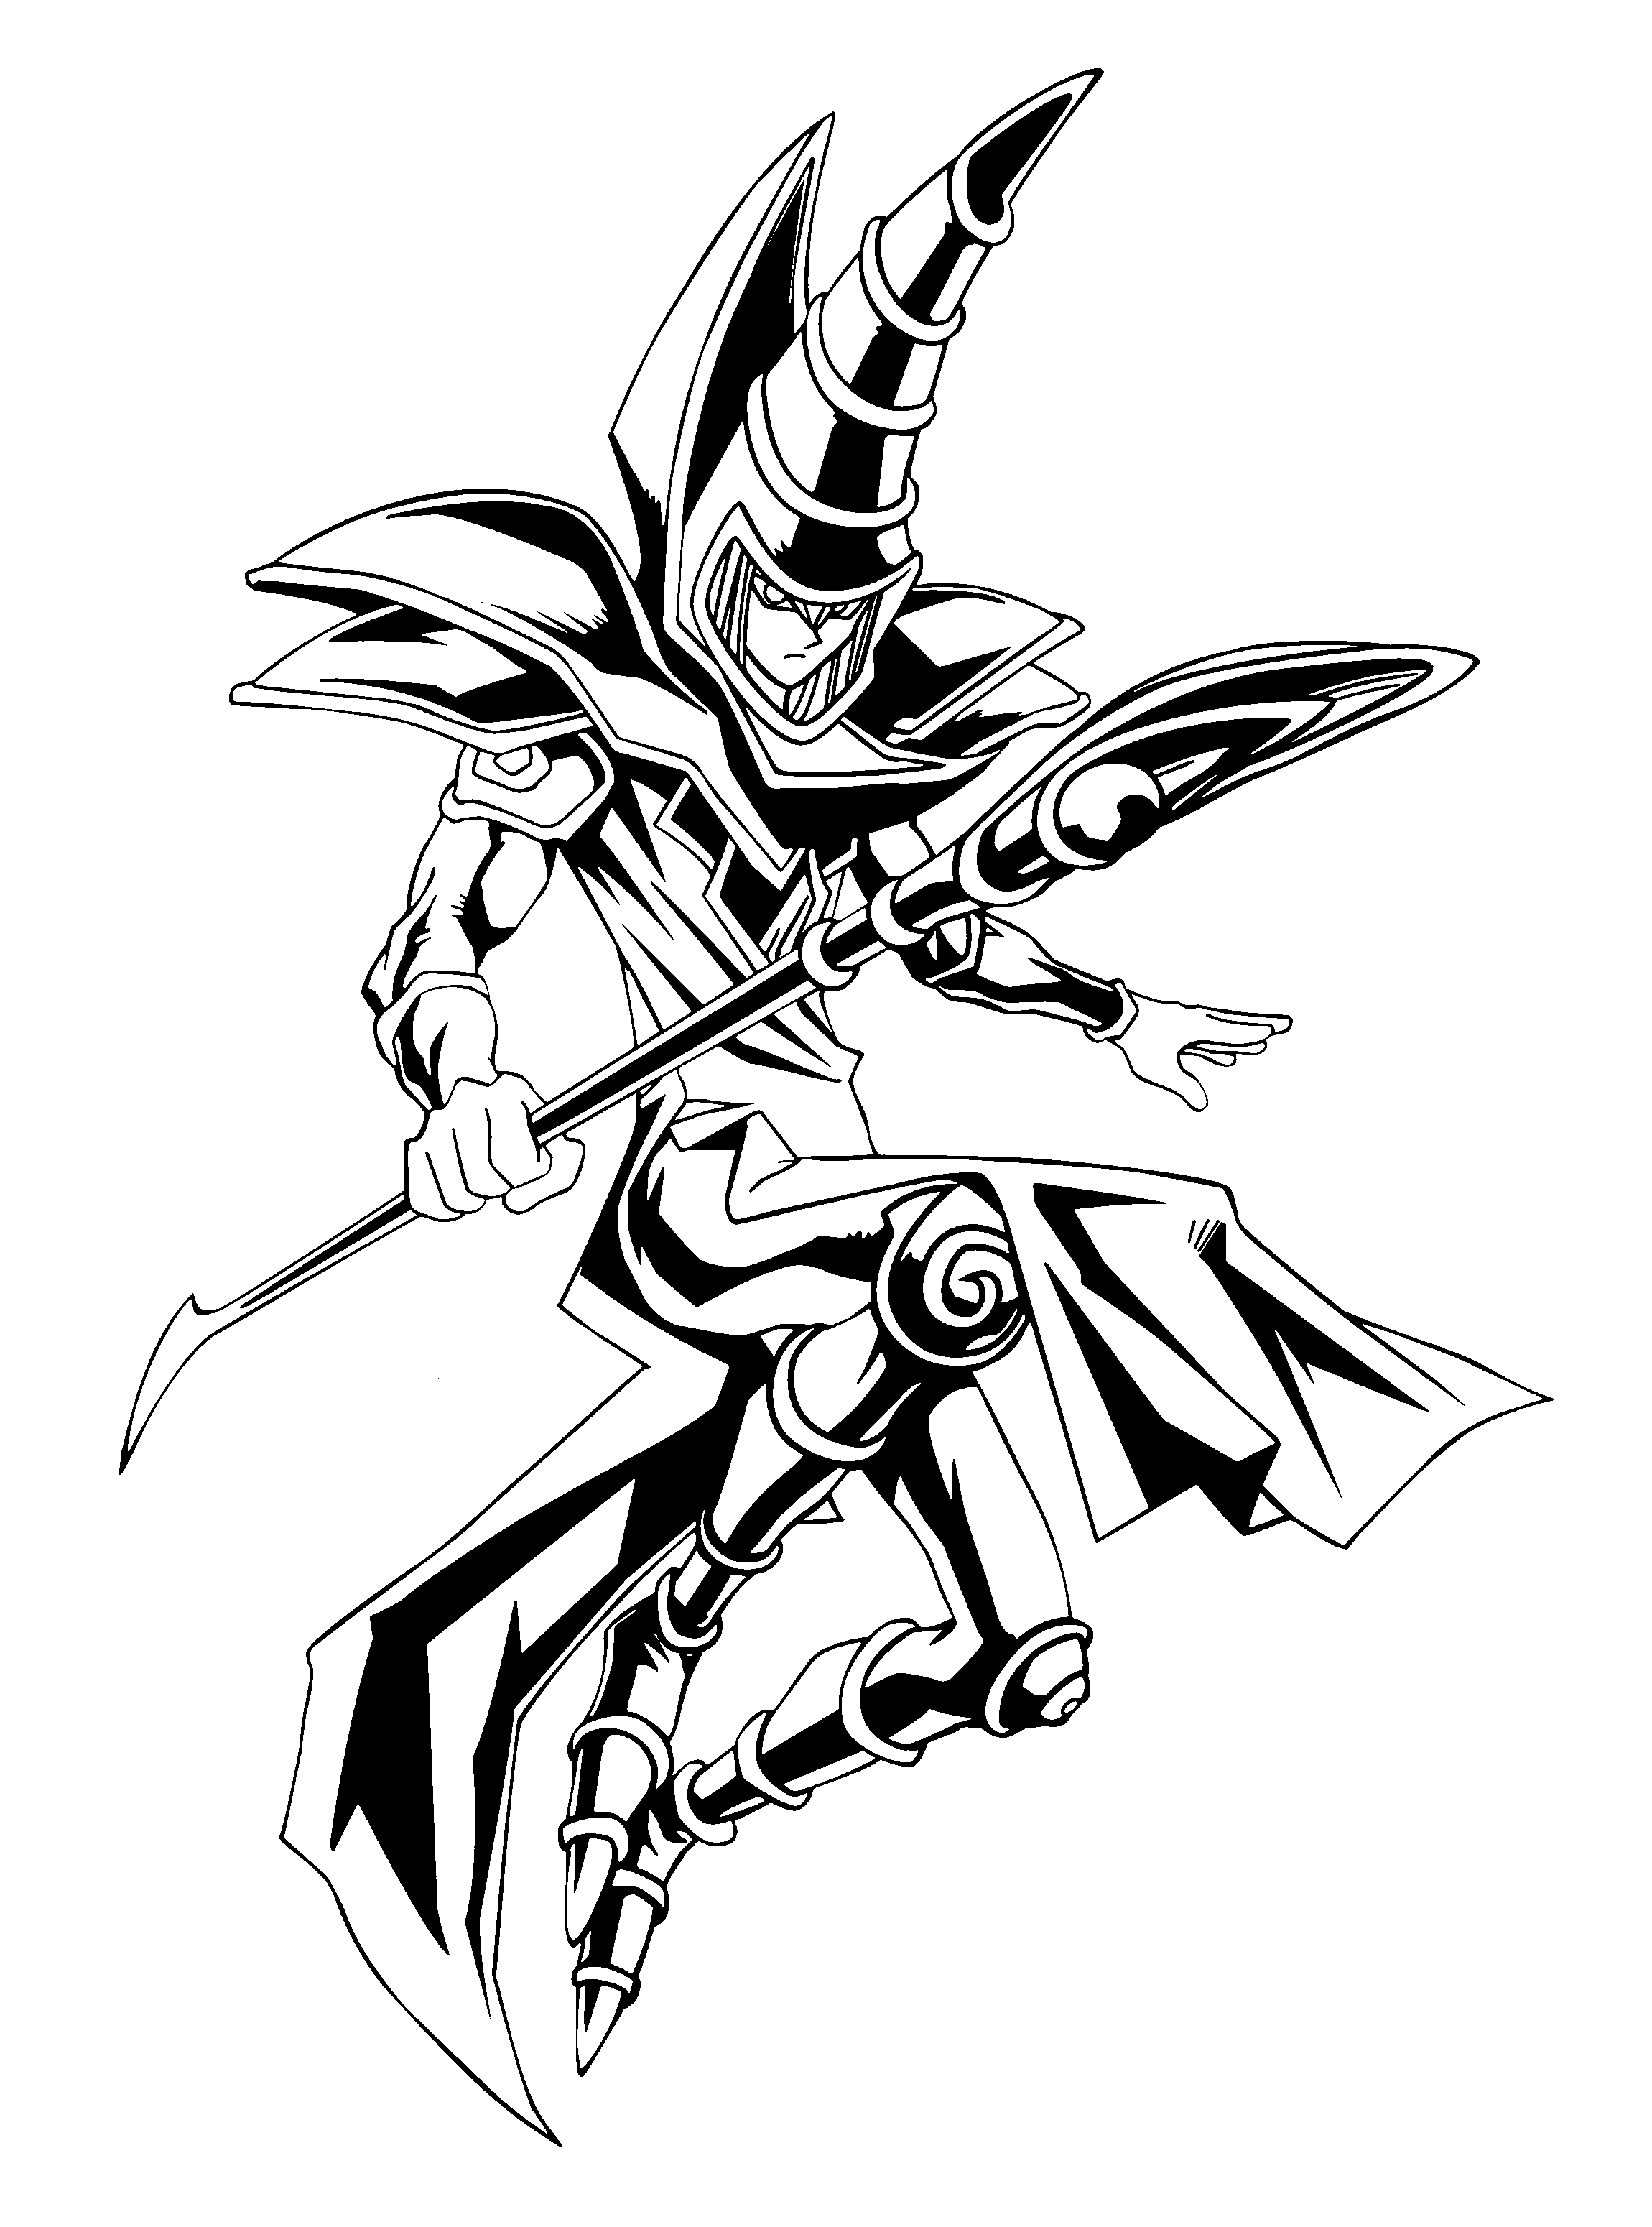 Yu gi oh Coloring Pages   Coloringpages1001.com